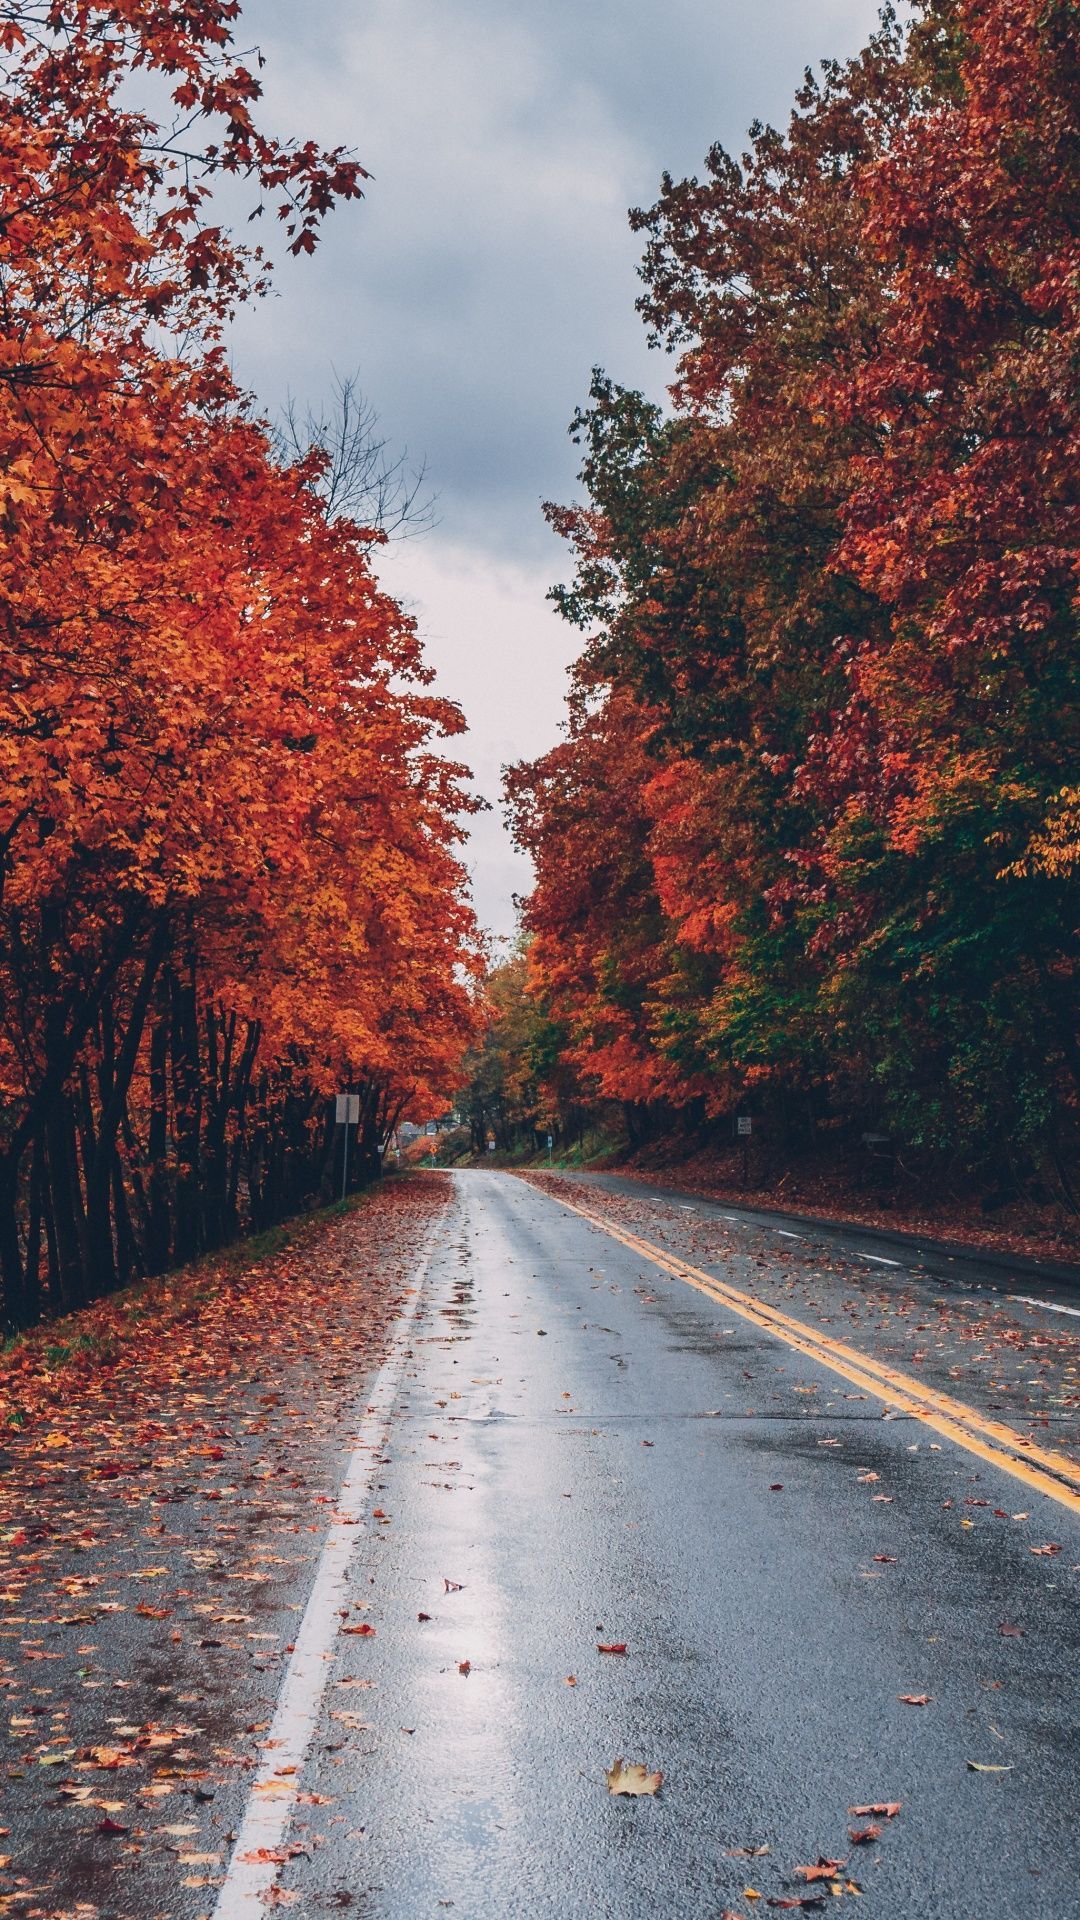 A road with trees on both sides, the leaves of which have turned red, orange and yellow. - Fall, fall iPhone